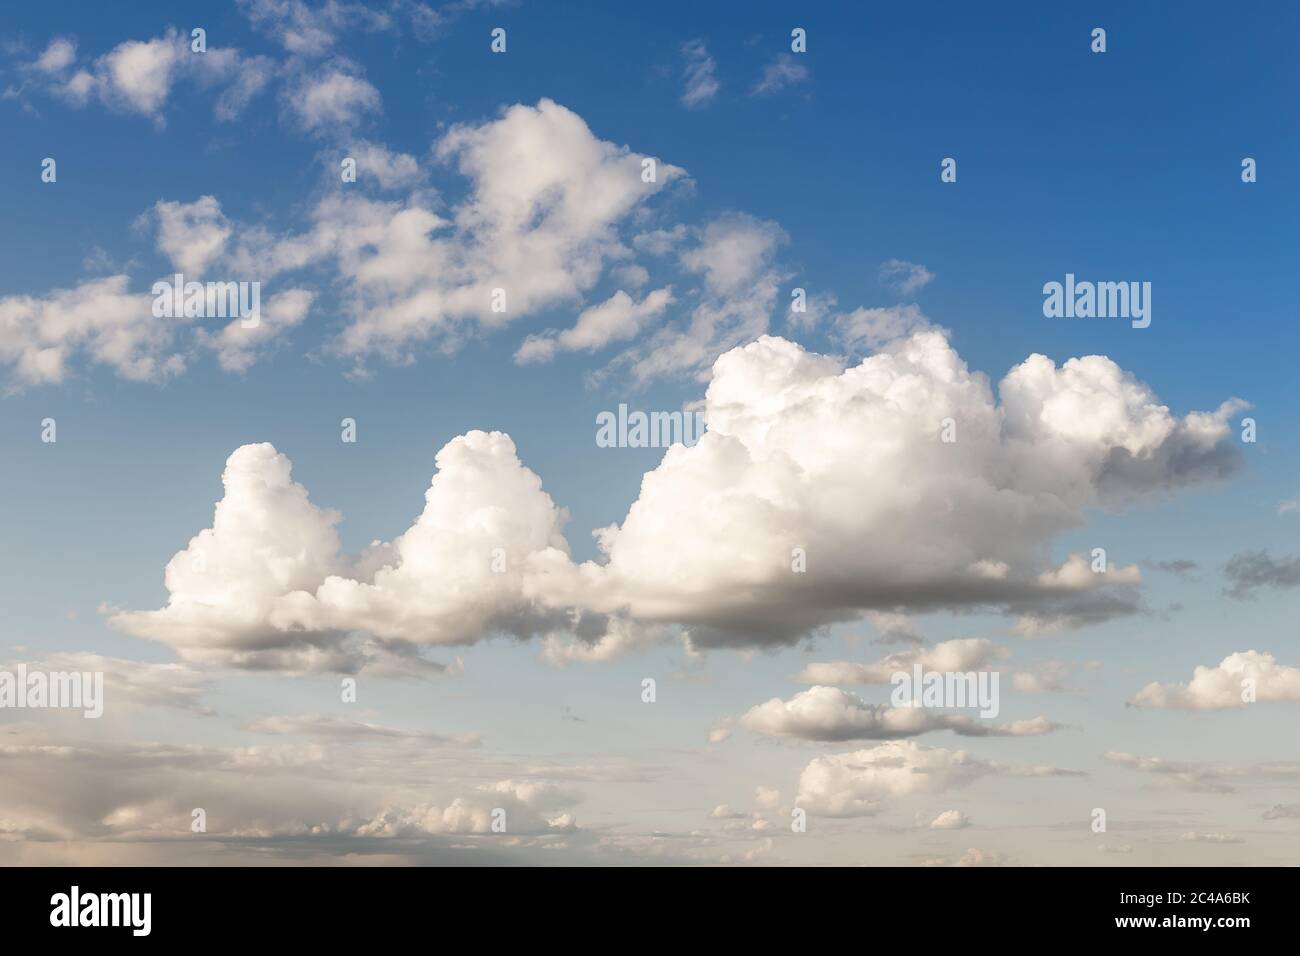 Weird unusual animal silhouette fantasy dream cloudscape on beautiful evening blue sky background. Fluffy cumulus cloud hills floating in clear Stock Photo